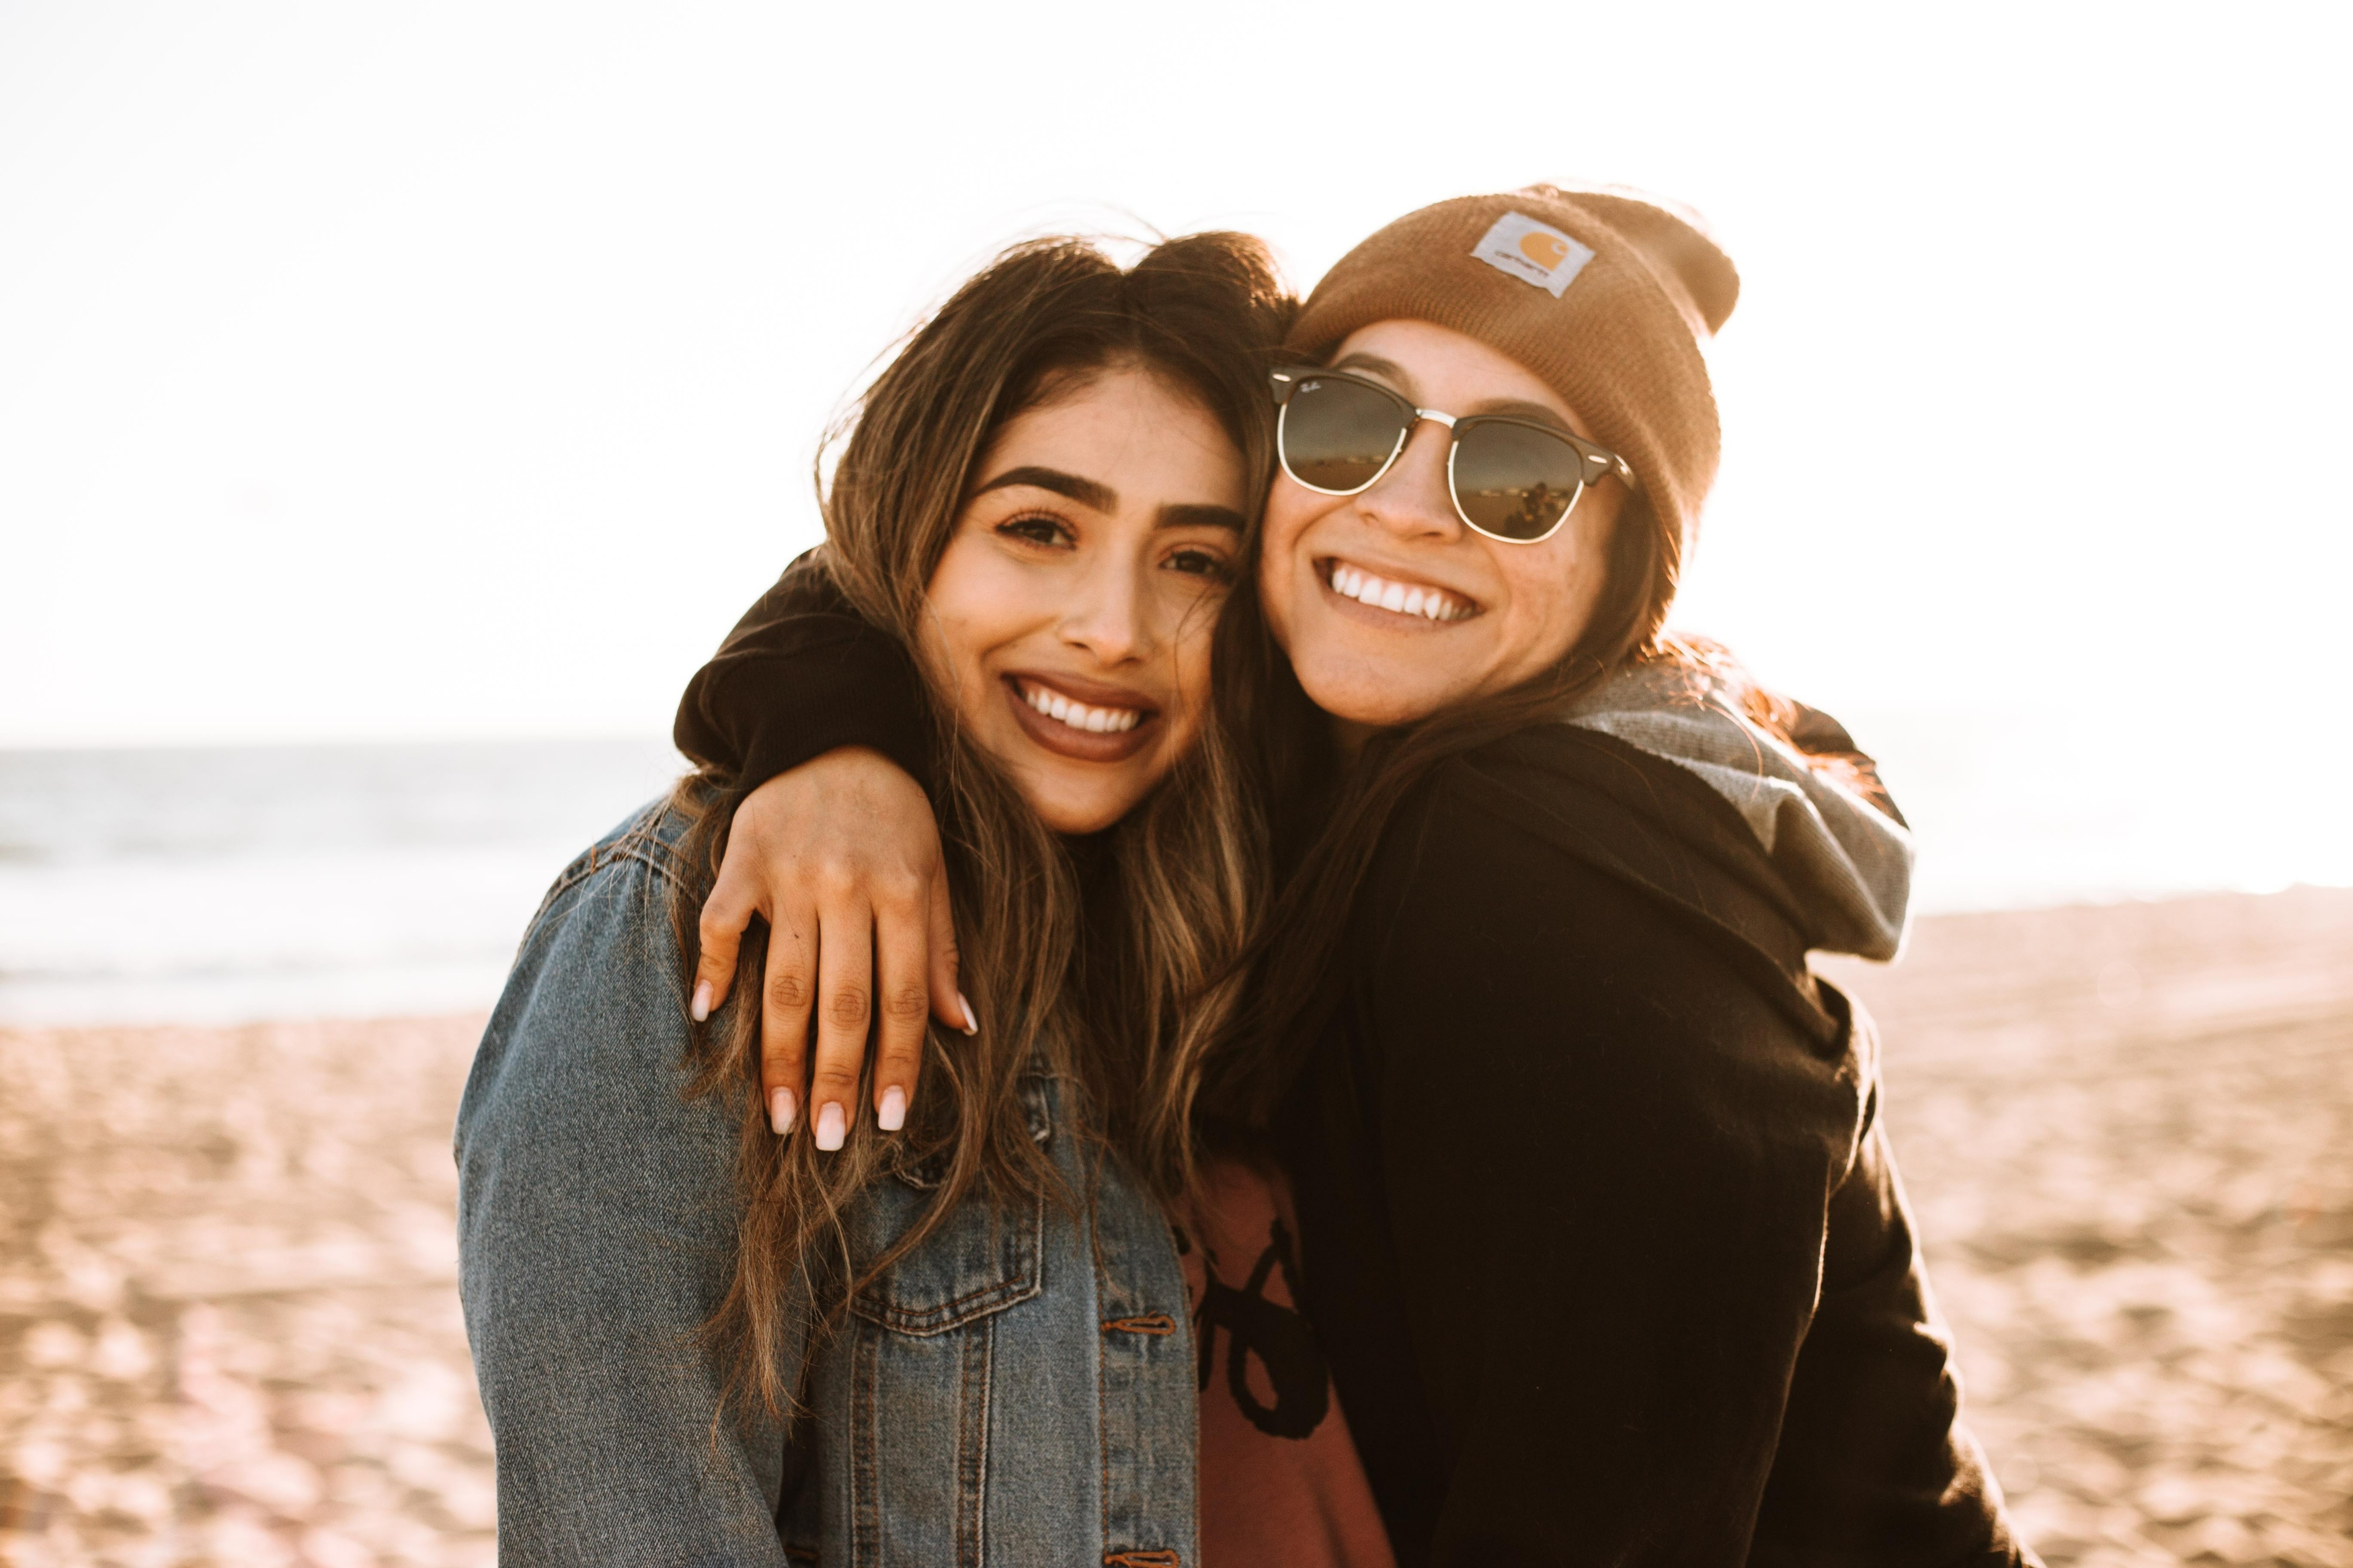 Free Photo | Cute family portrait of two sister womanâ€™s hugs and smile,  lifestyle studying portrait, trendy hipster outfits, relations concept,  natural beauty, happy together.